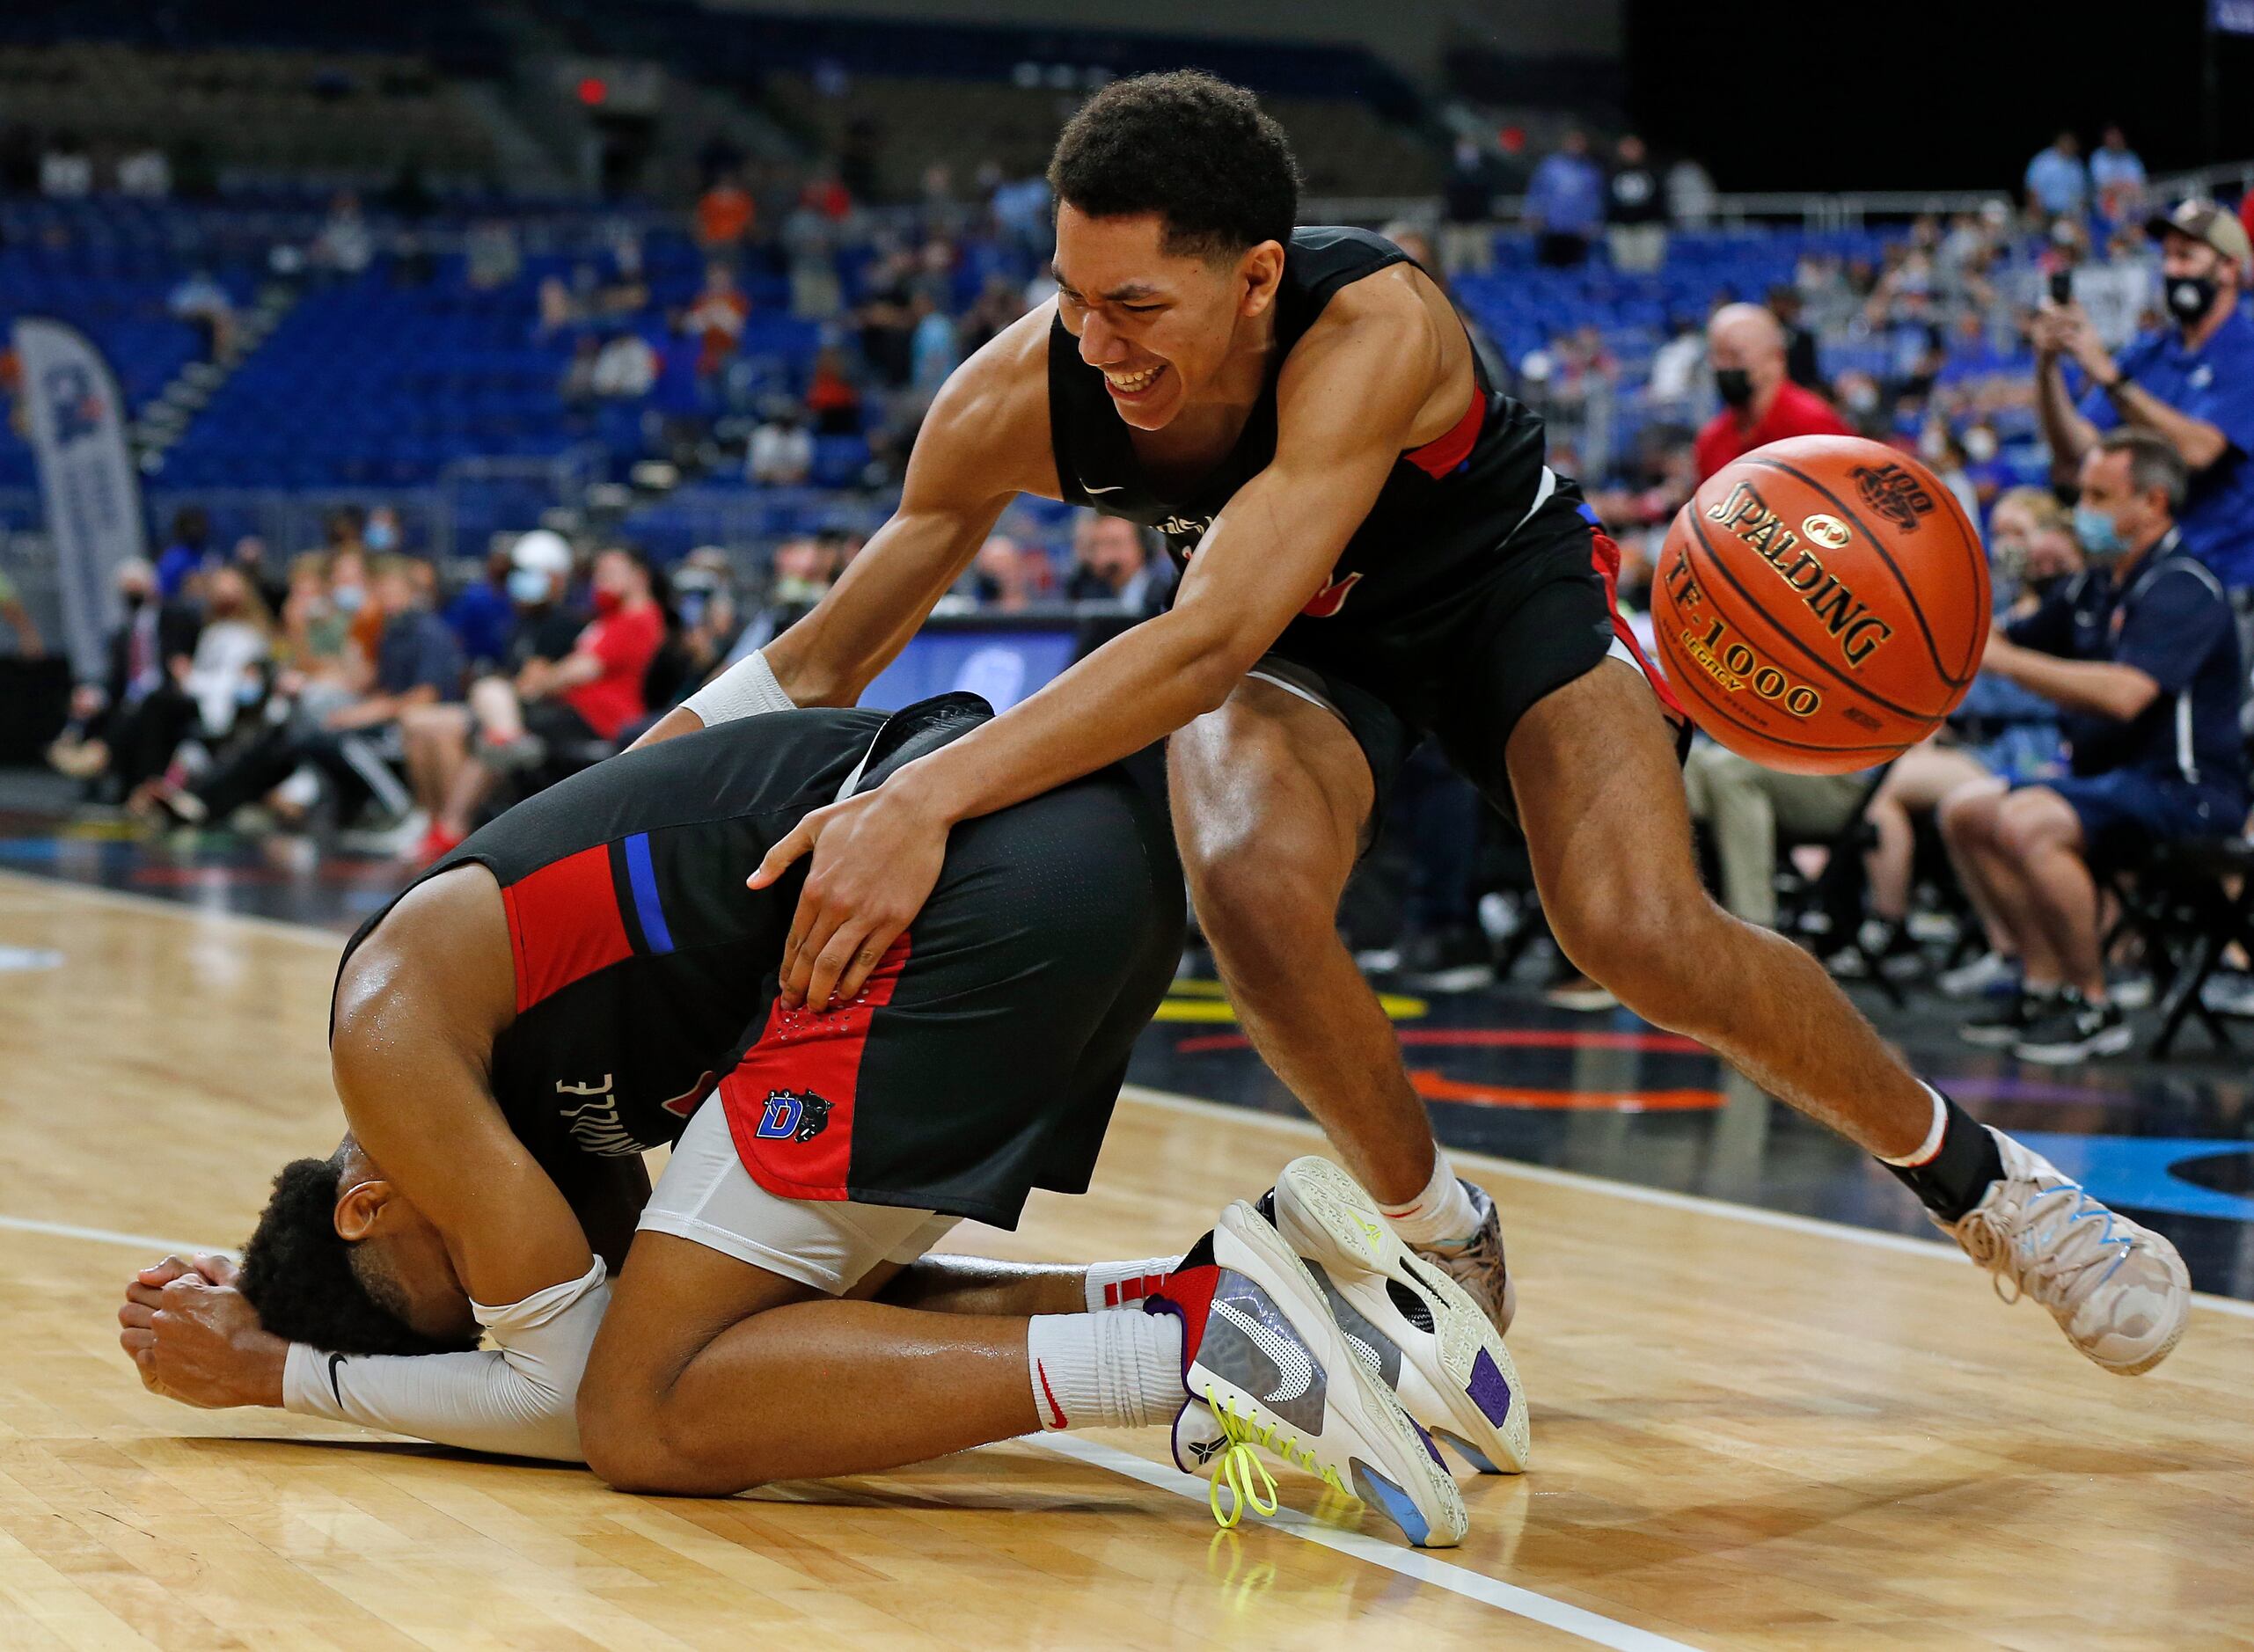 Duncanville Zhuric Phelps #0 fell to the floor as teammate Duncanville Davion Sykes #22 goes...